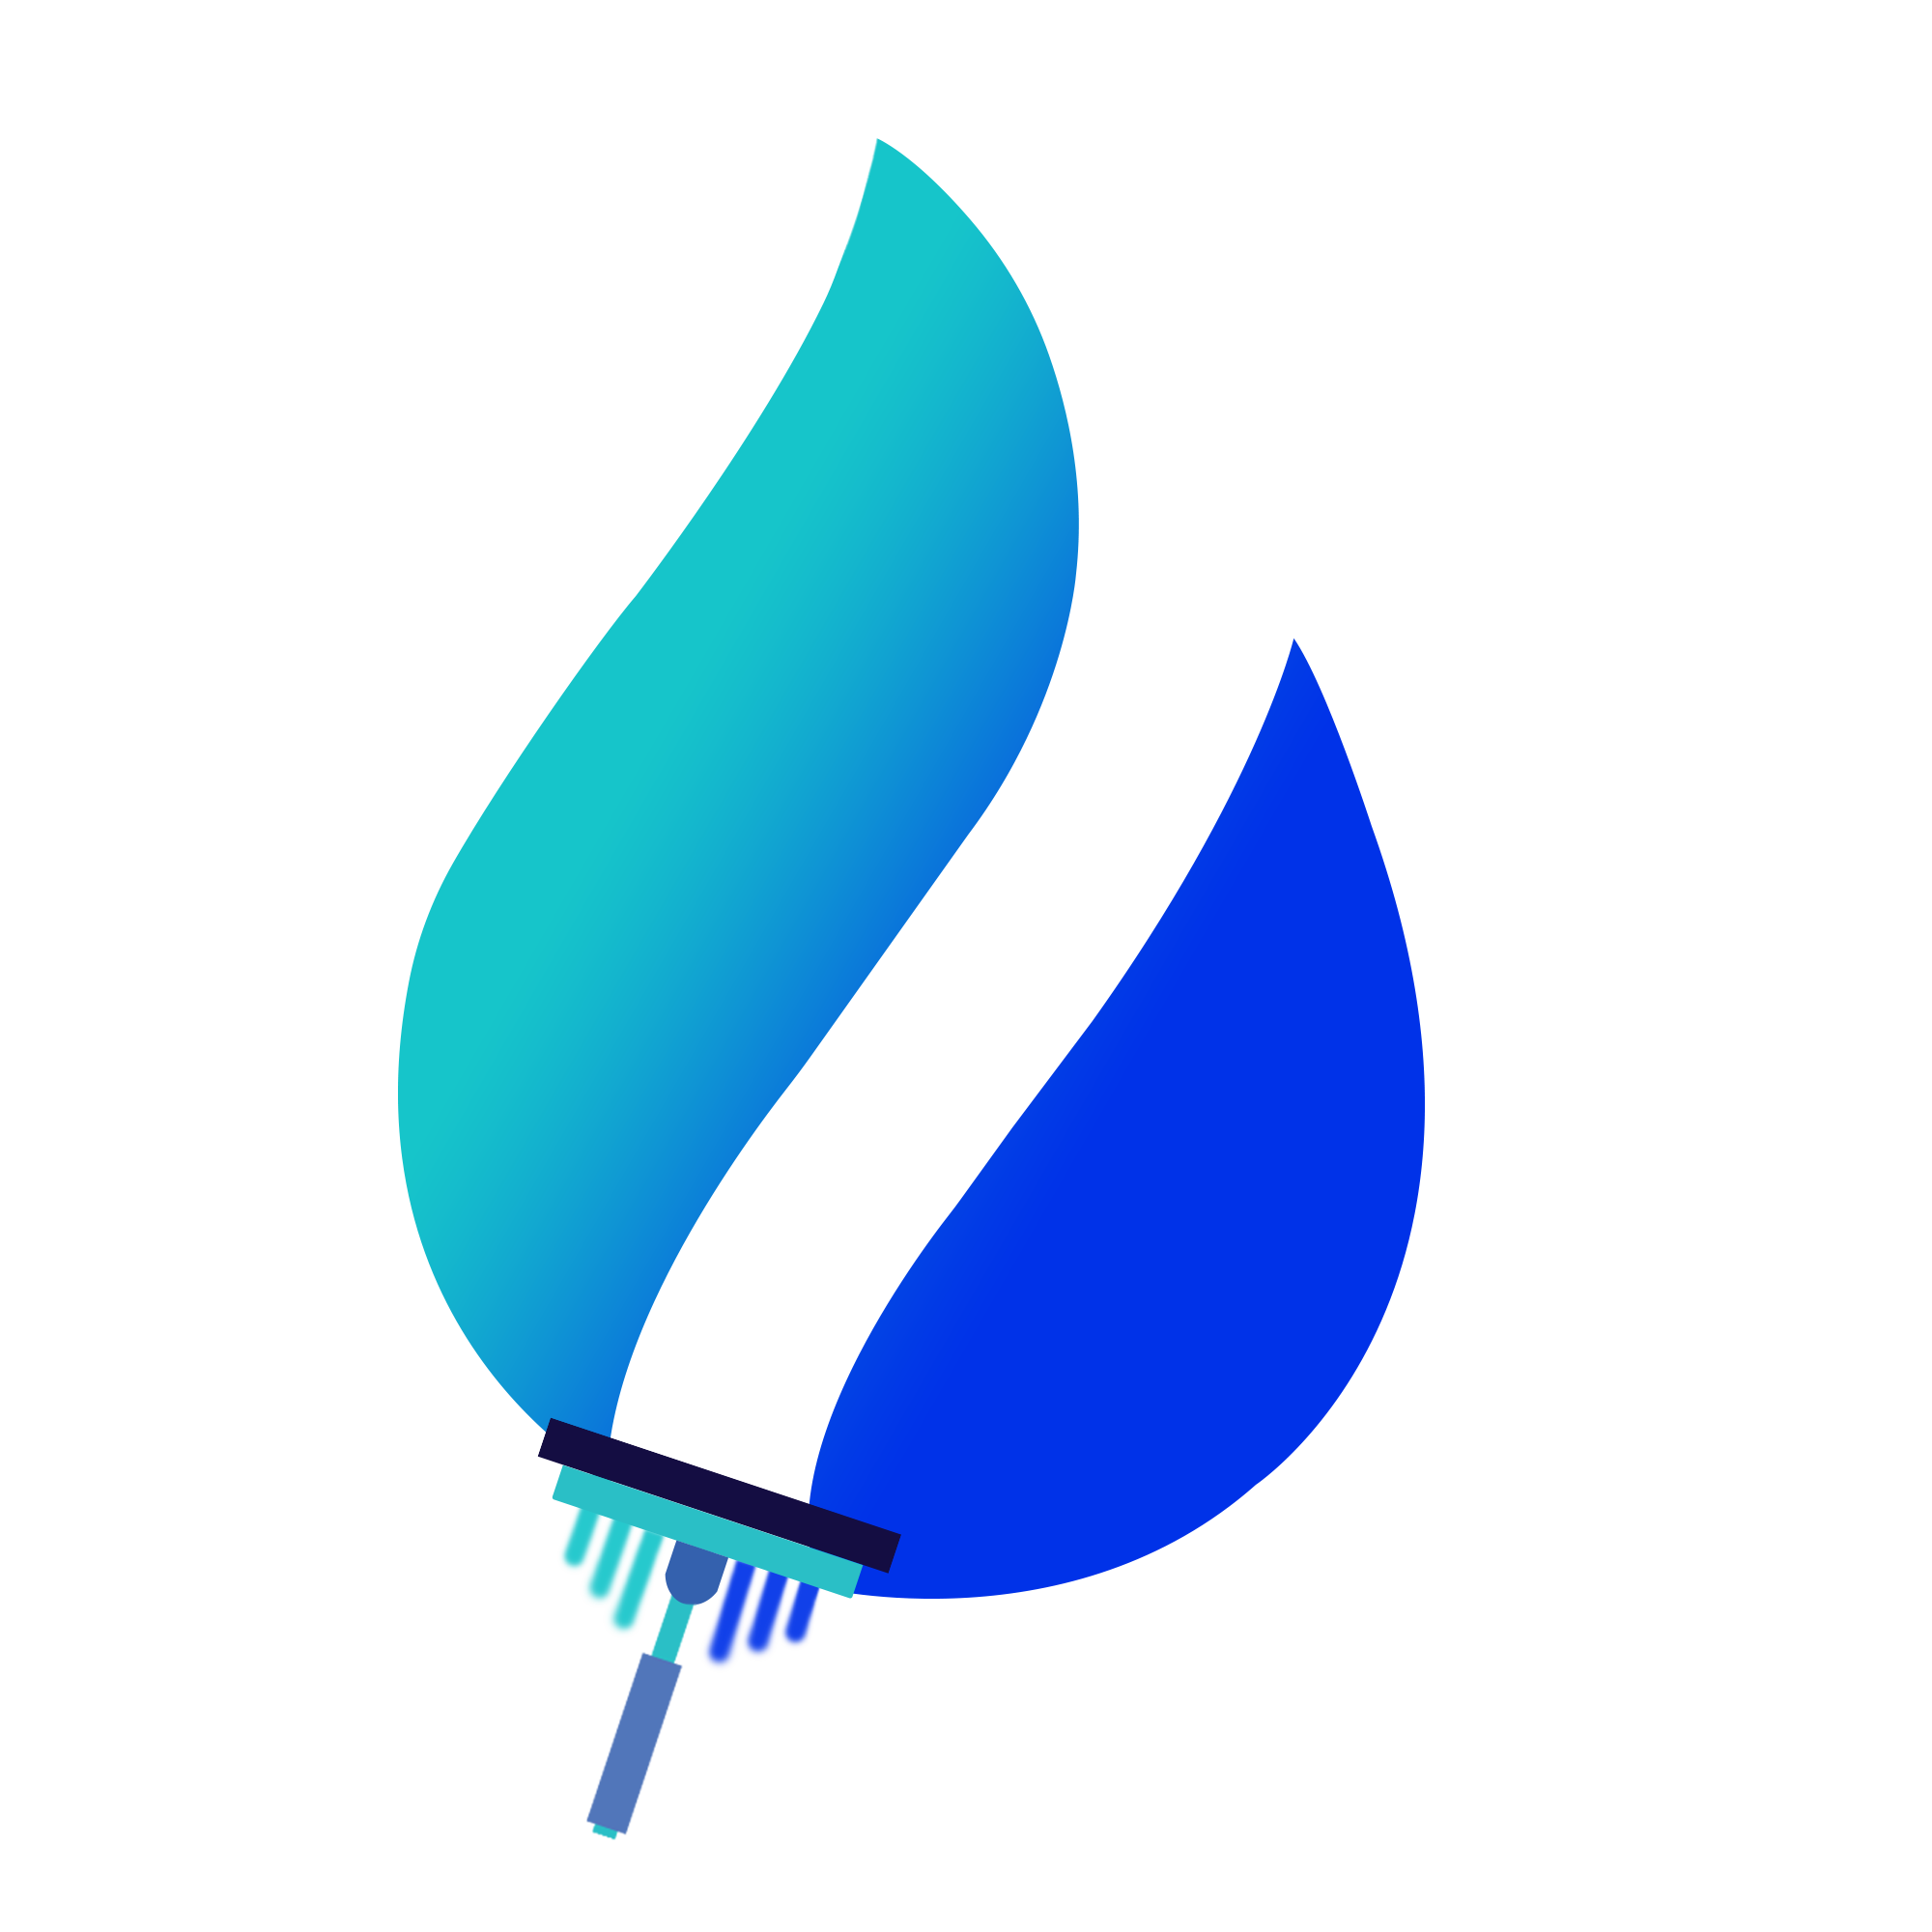 PCC Reinigung Logo, it is a drop of water in blue and light blue color